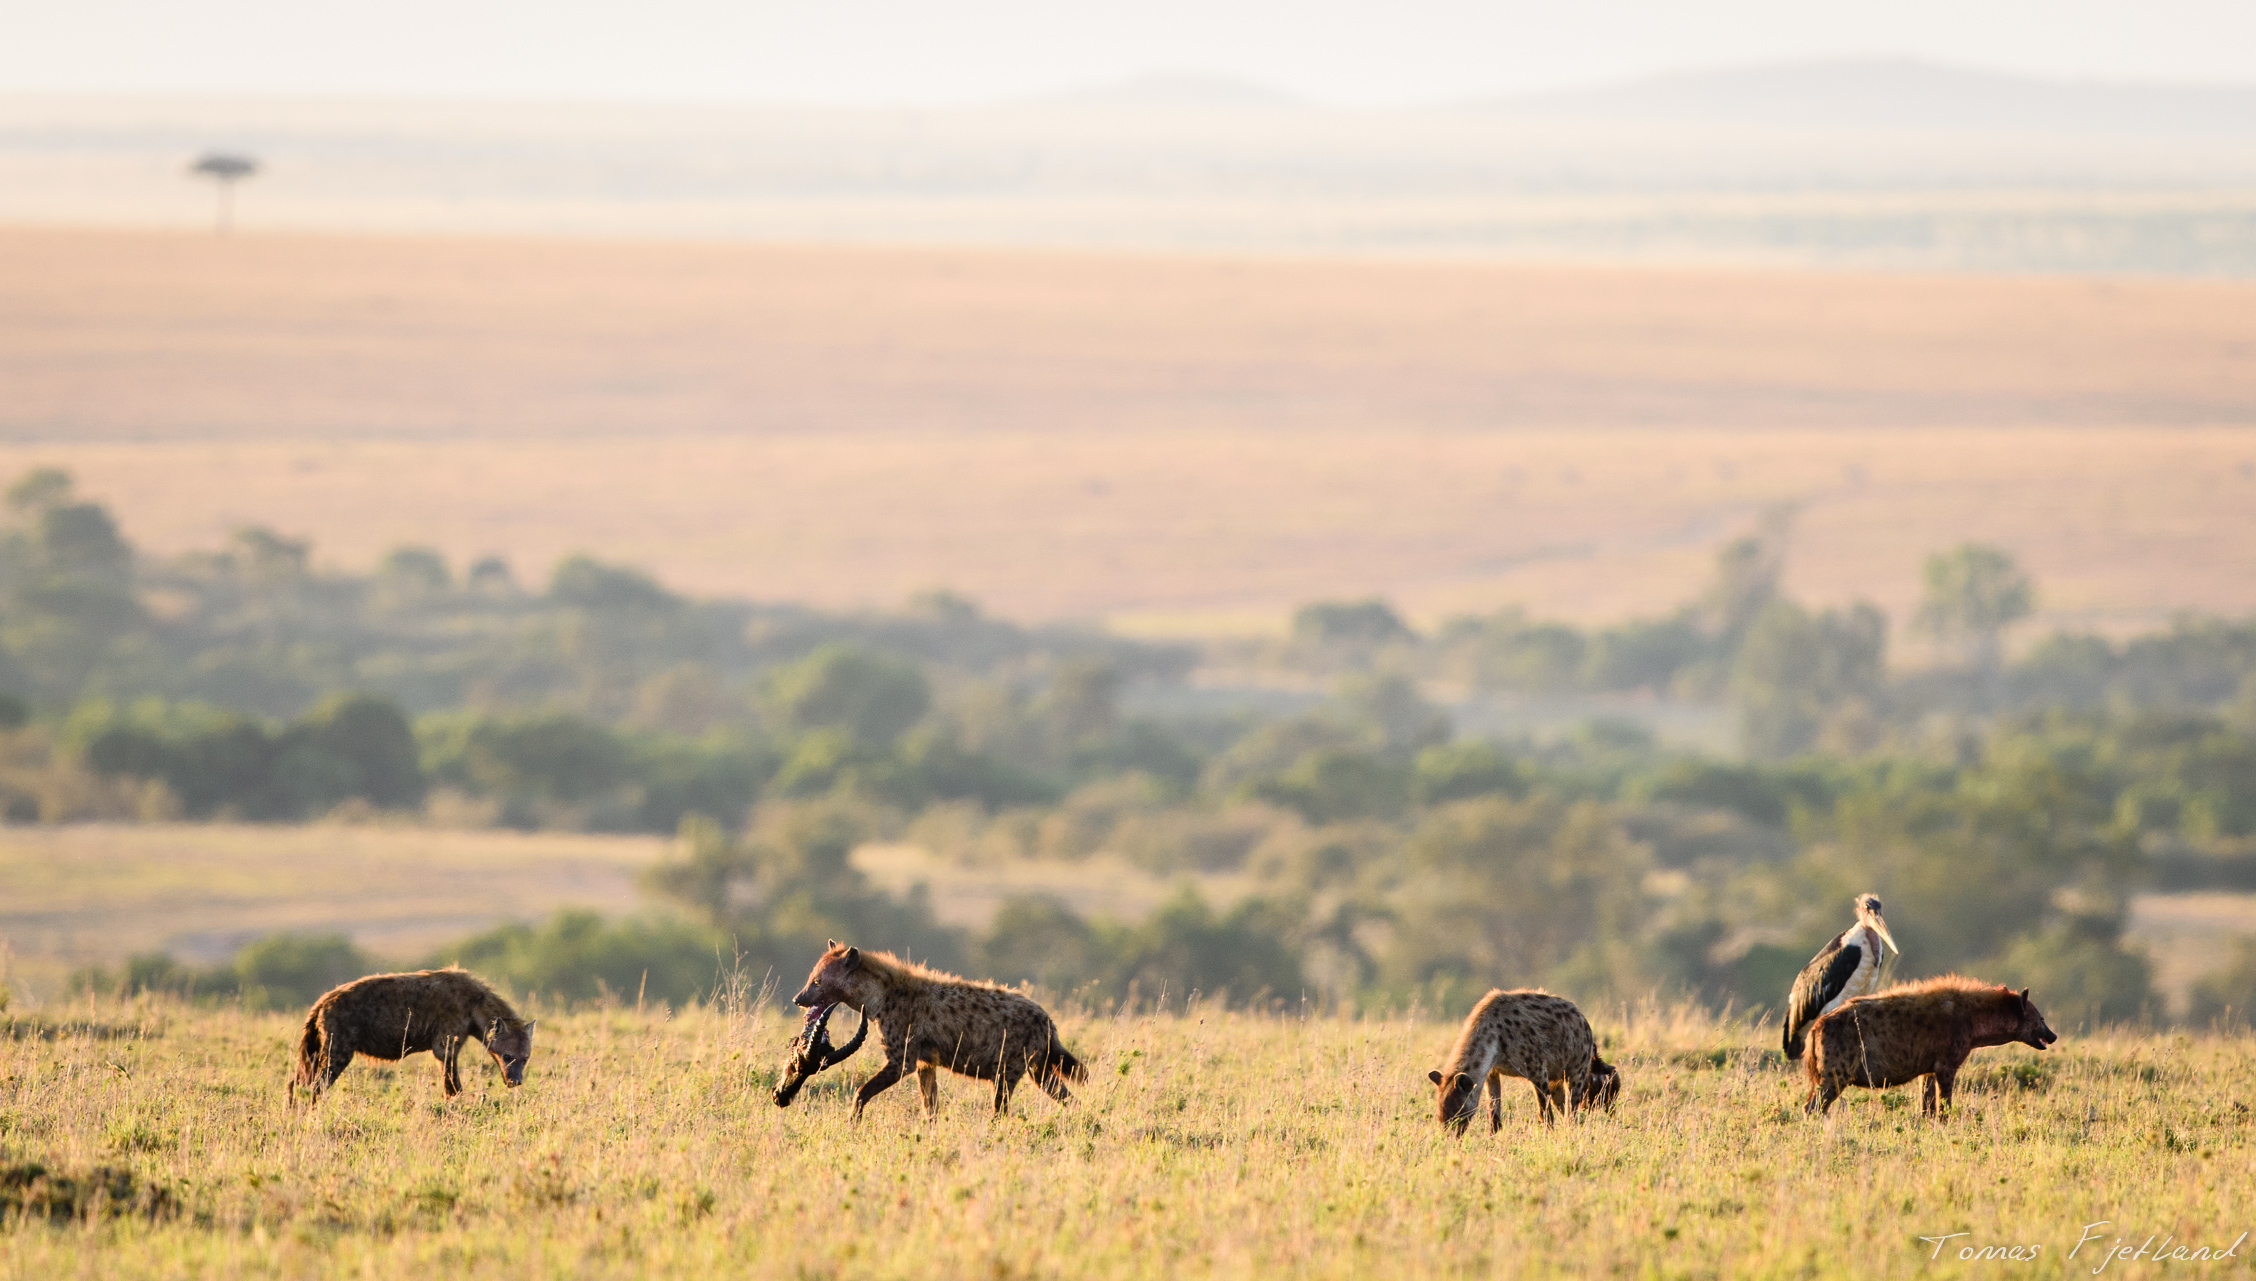 A group of hyenas have managed to steal the remains of a carcass during the night and were fighting over the pieces.